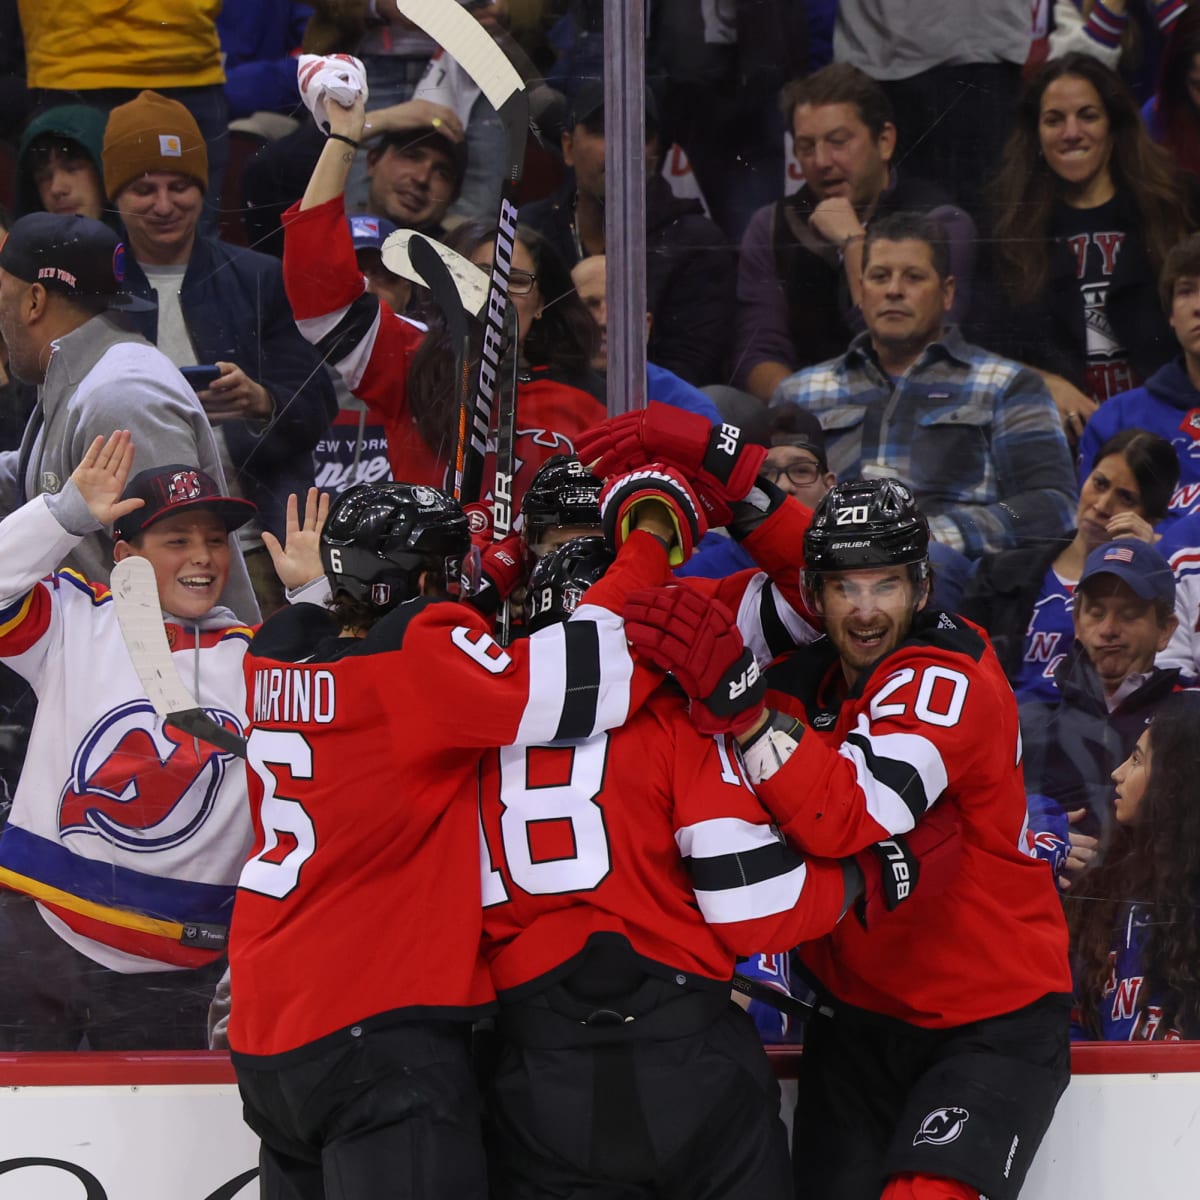 The New Jersey Devils Raised Most Ticket Prices for 2013 Season